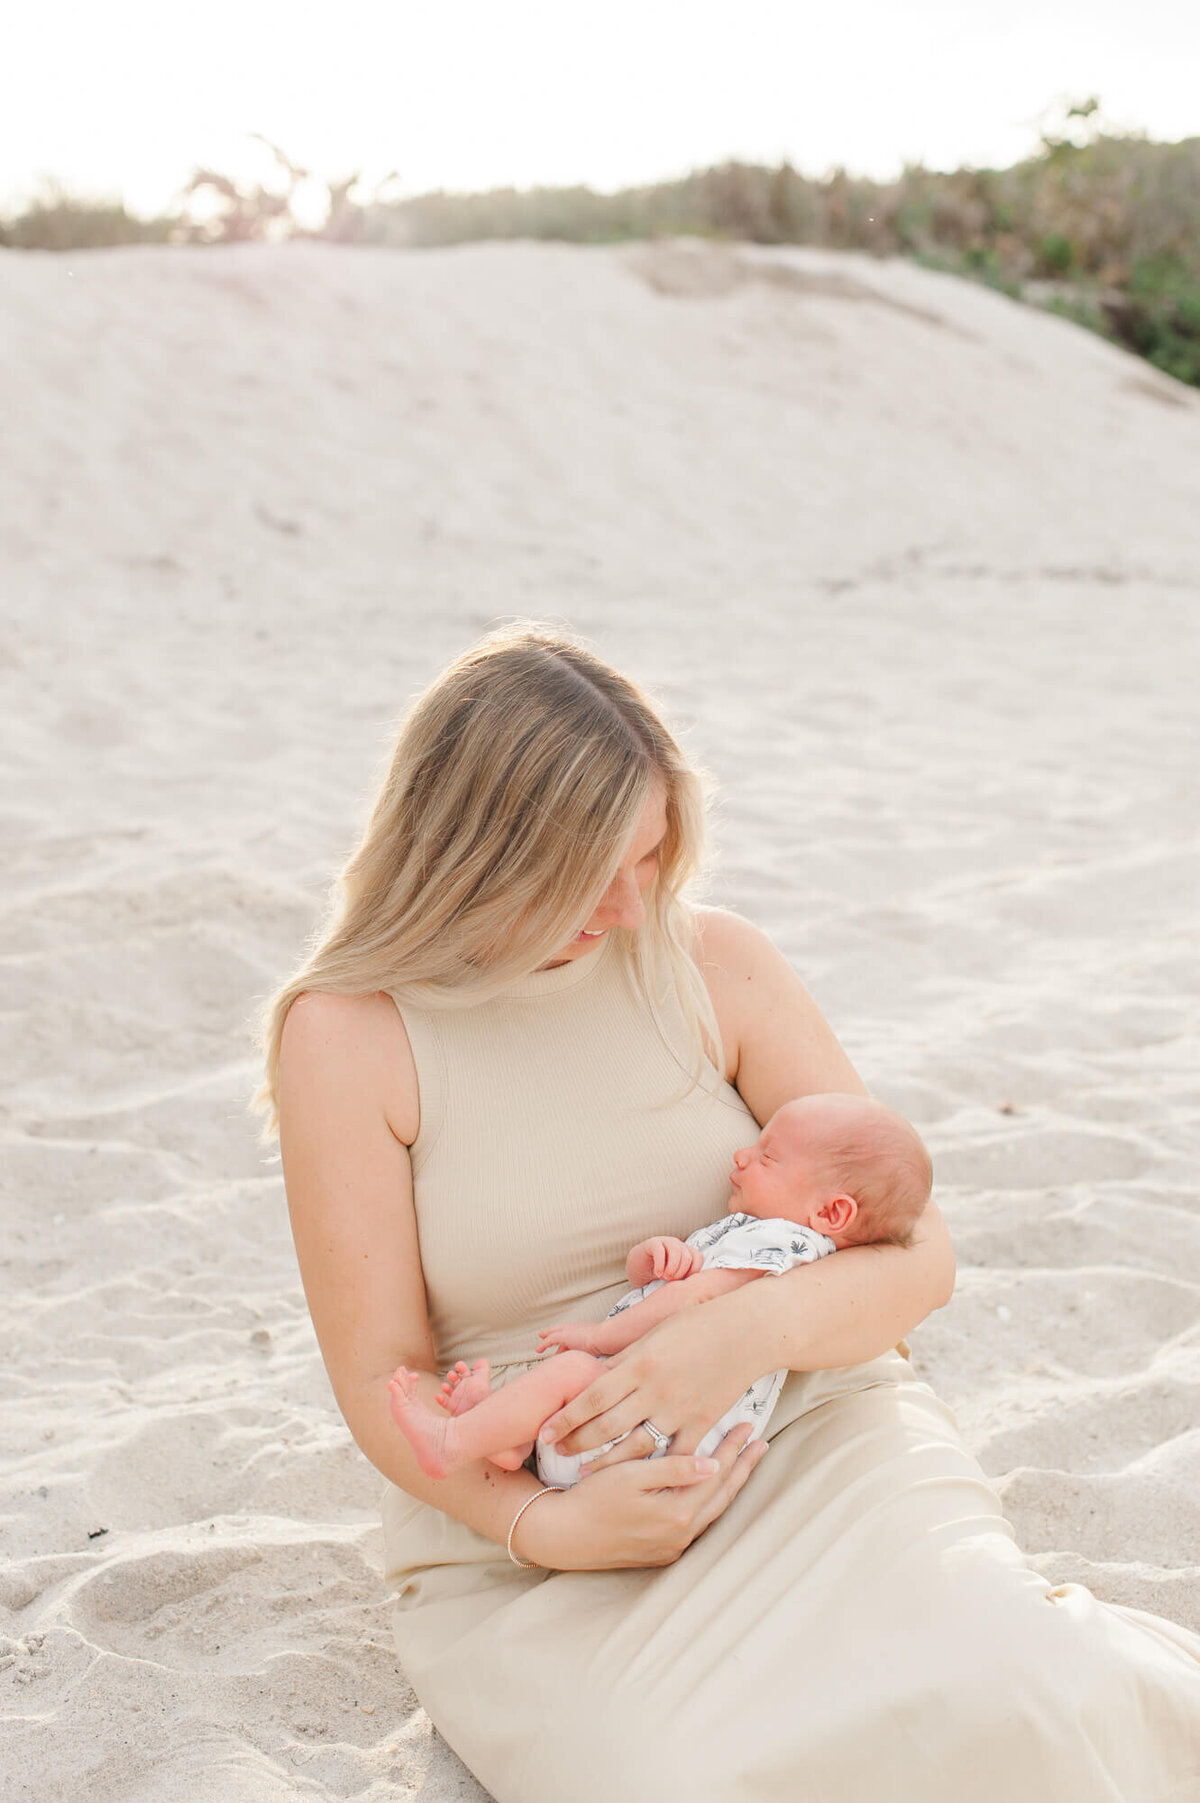 Orlando newborn photographer captures new mom holding her son while sitting in the sand